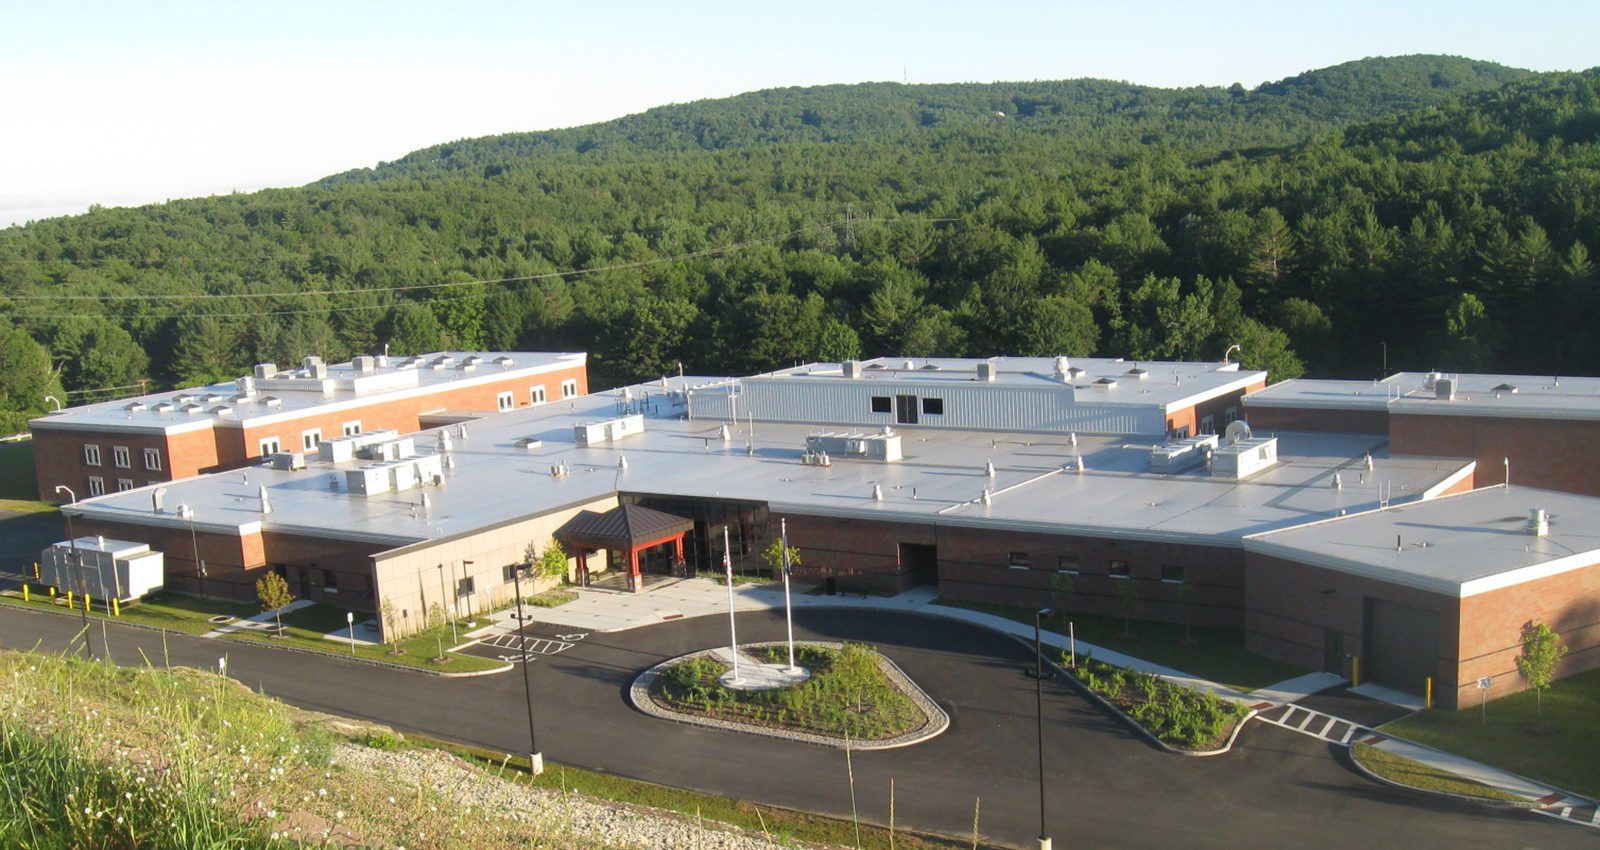 Cheshire County House of Corrections